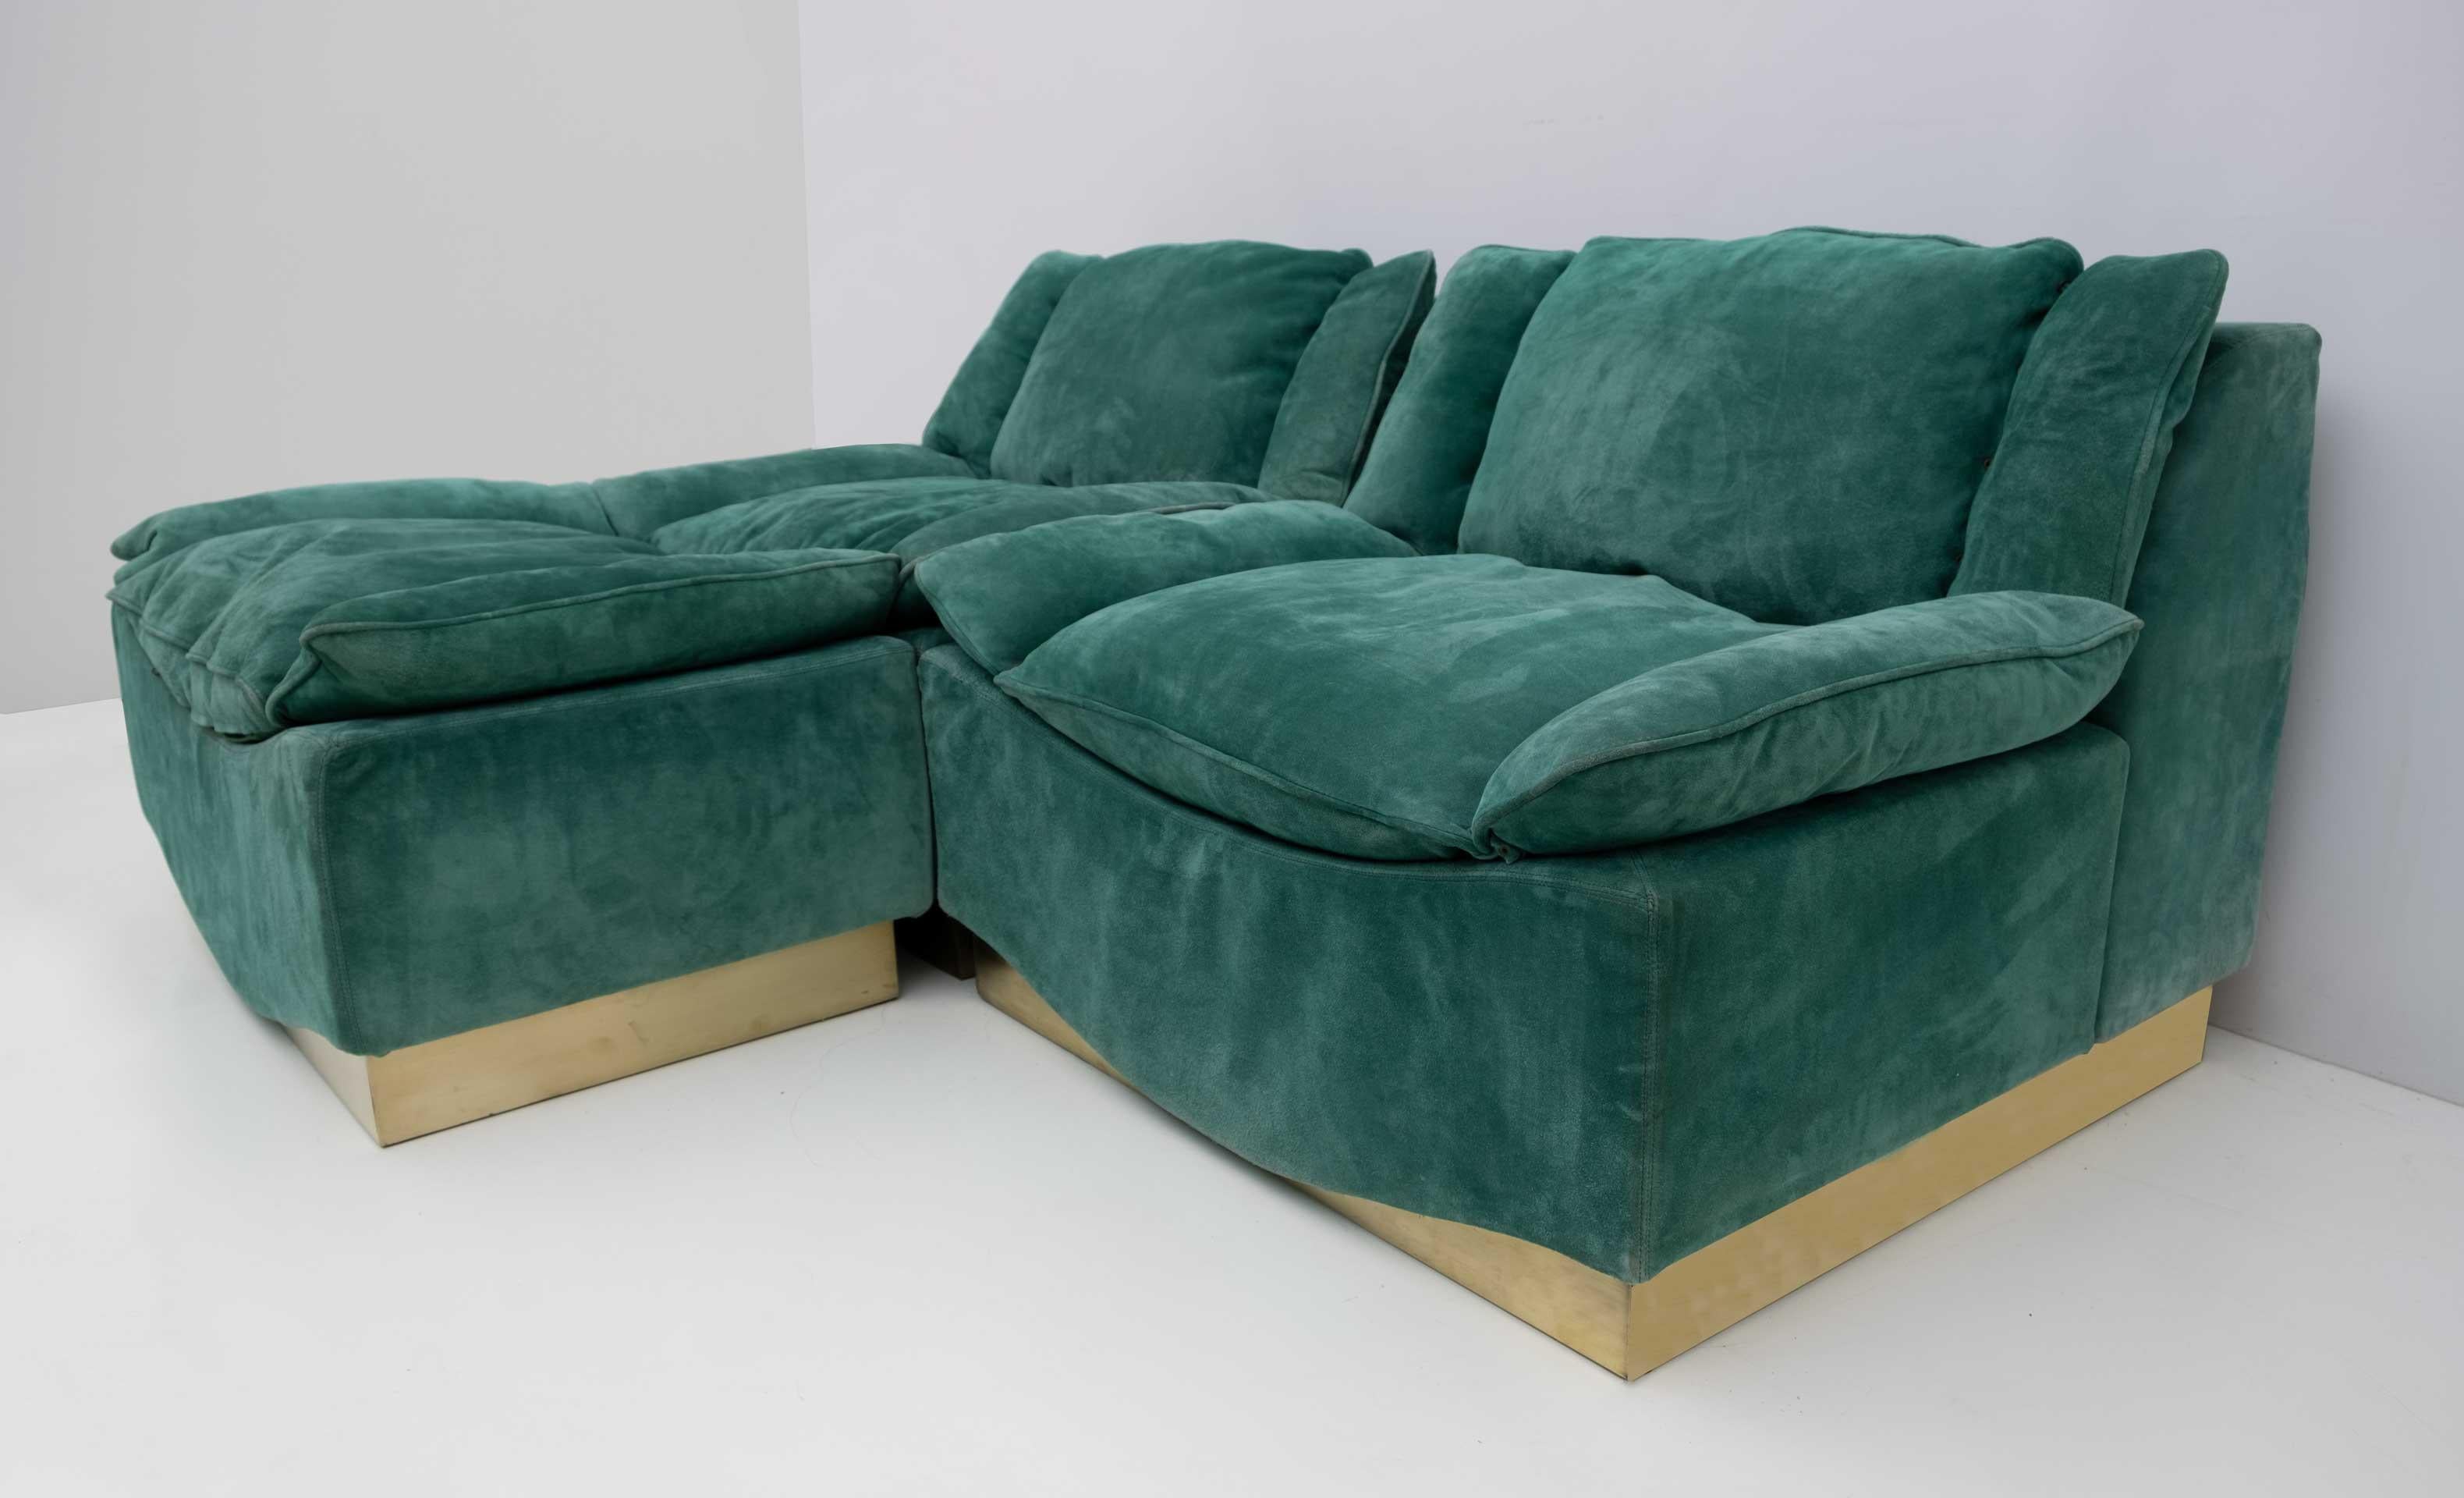 Pair of Luciano Frigerio Mid-Century Modern Suede Armchairs and Footrest, 1970s For Sale 2